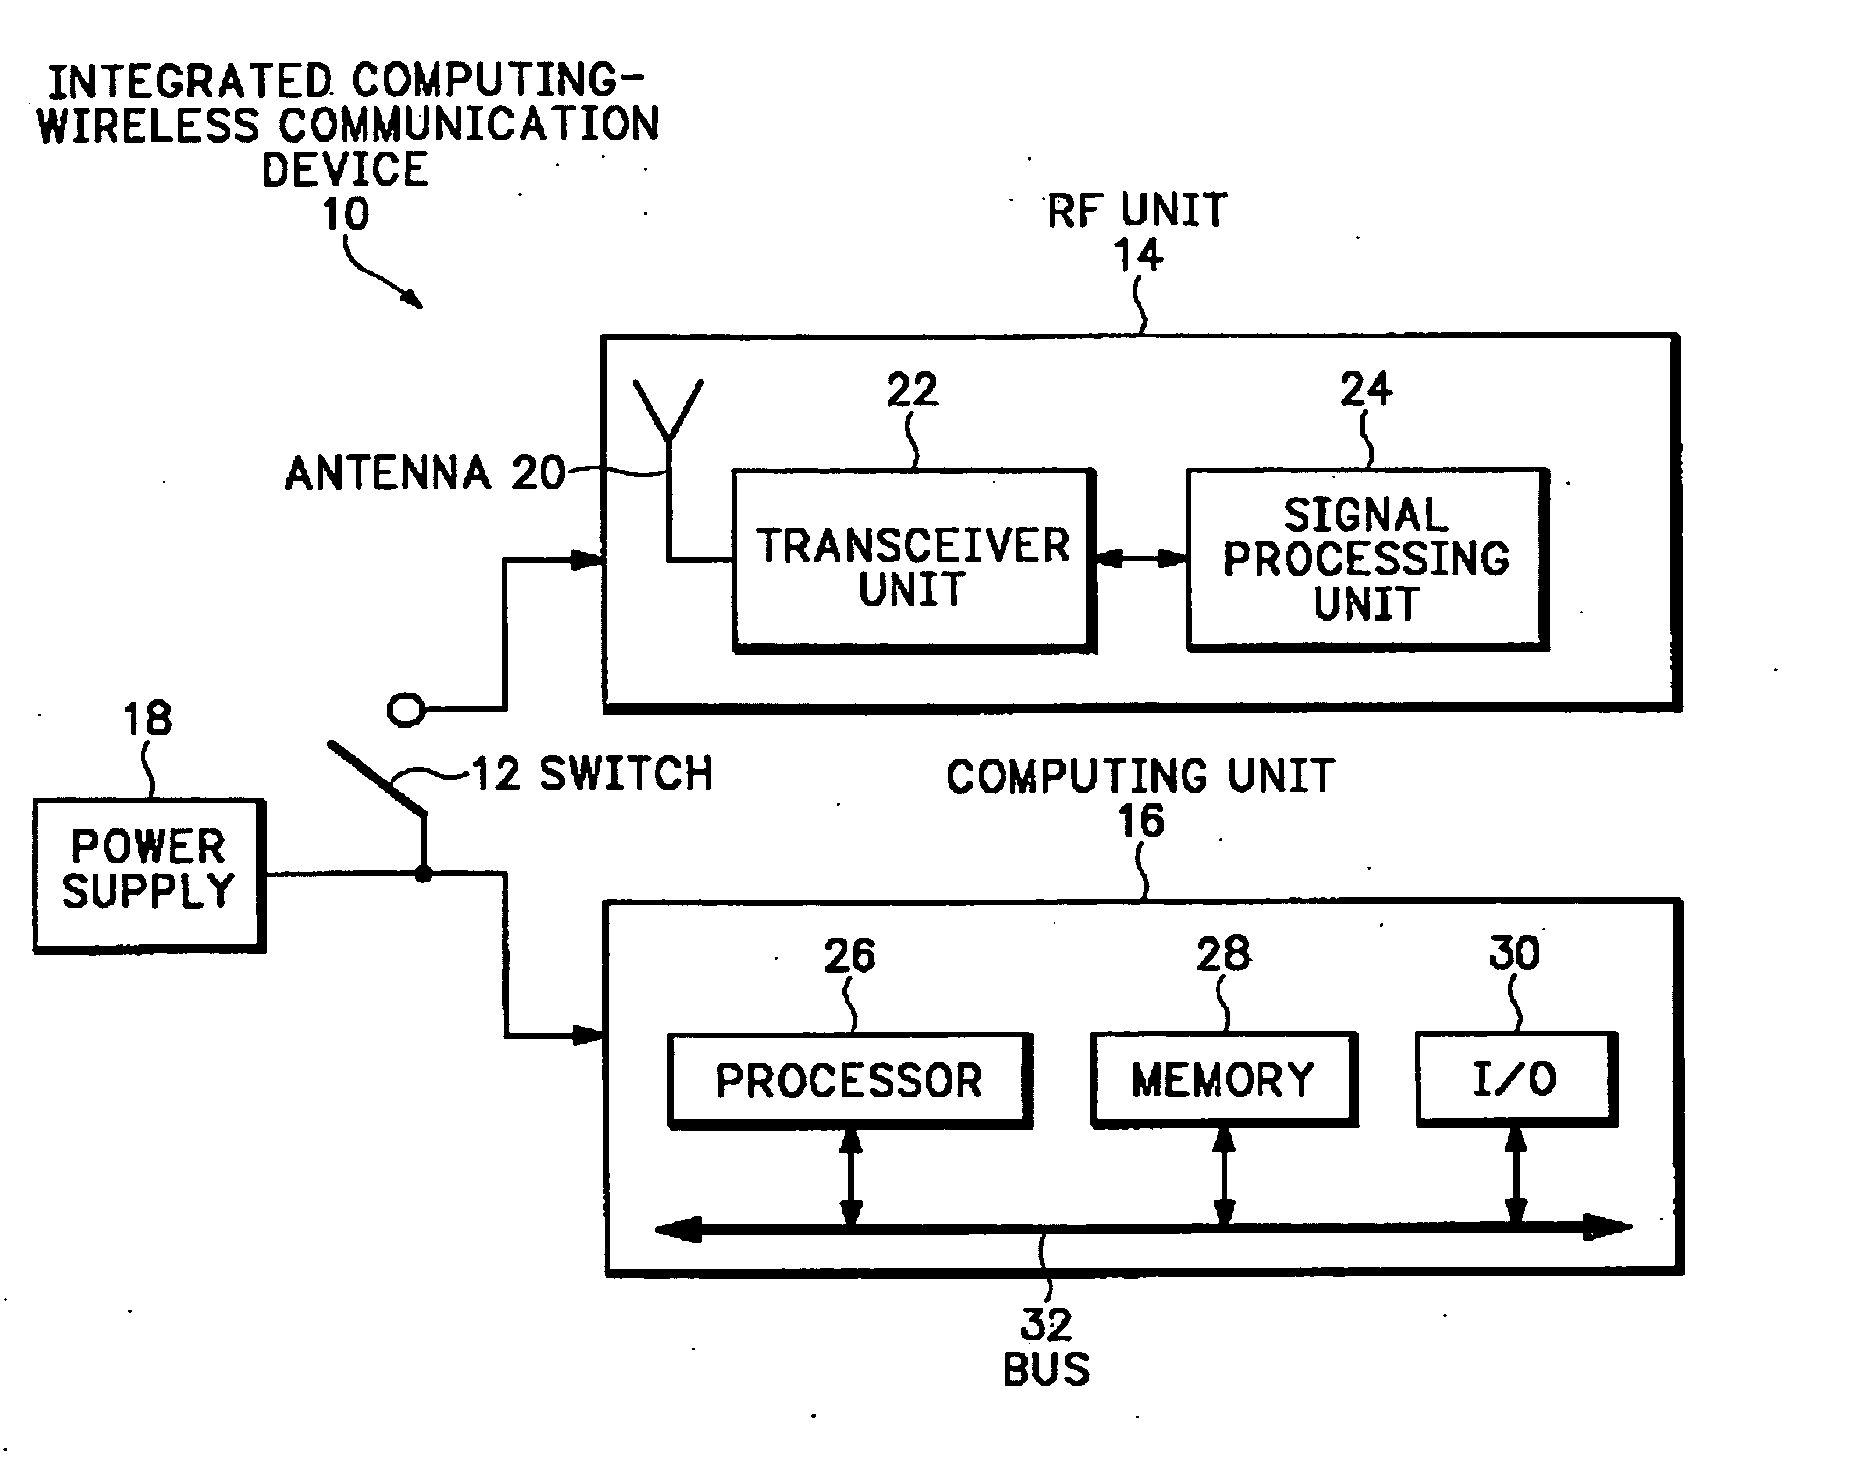 Method & apparatus for disabling the RF functionality of a multi-function wireless communication device while maintaining access to local functionality